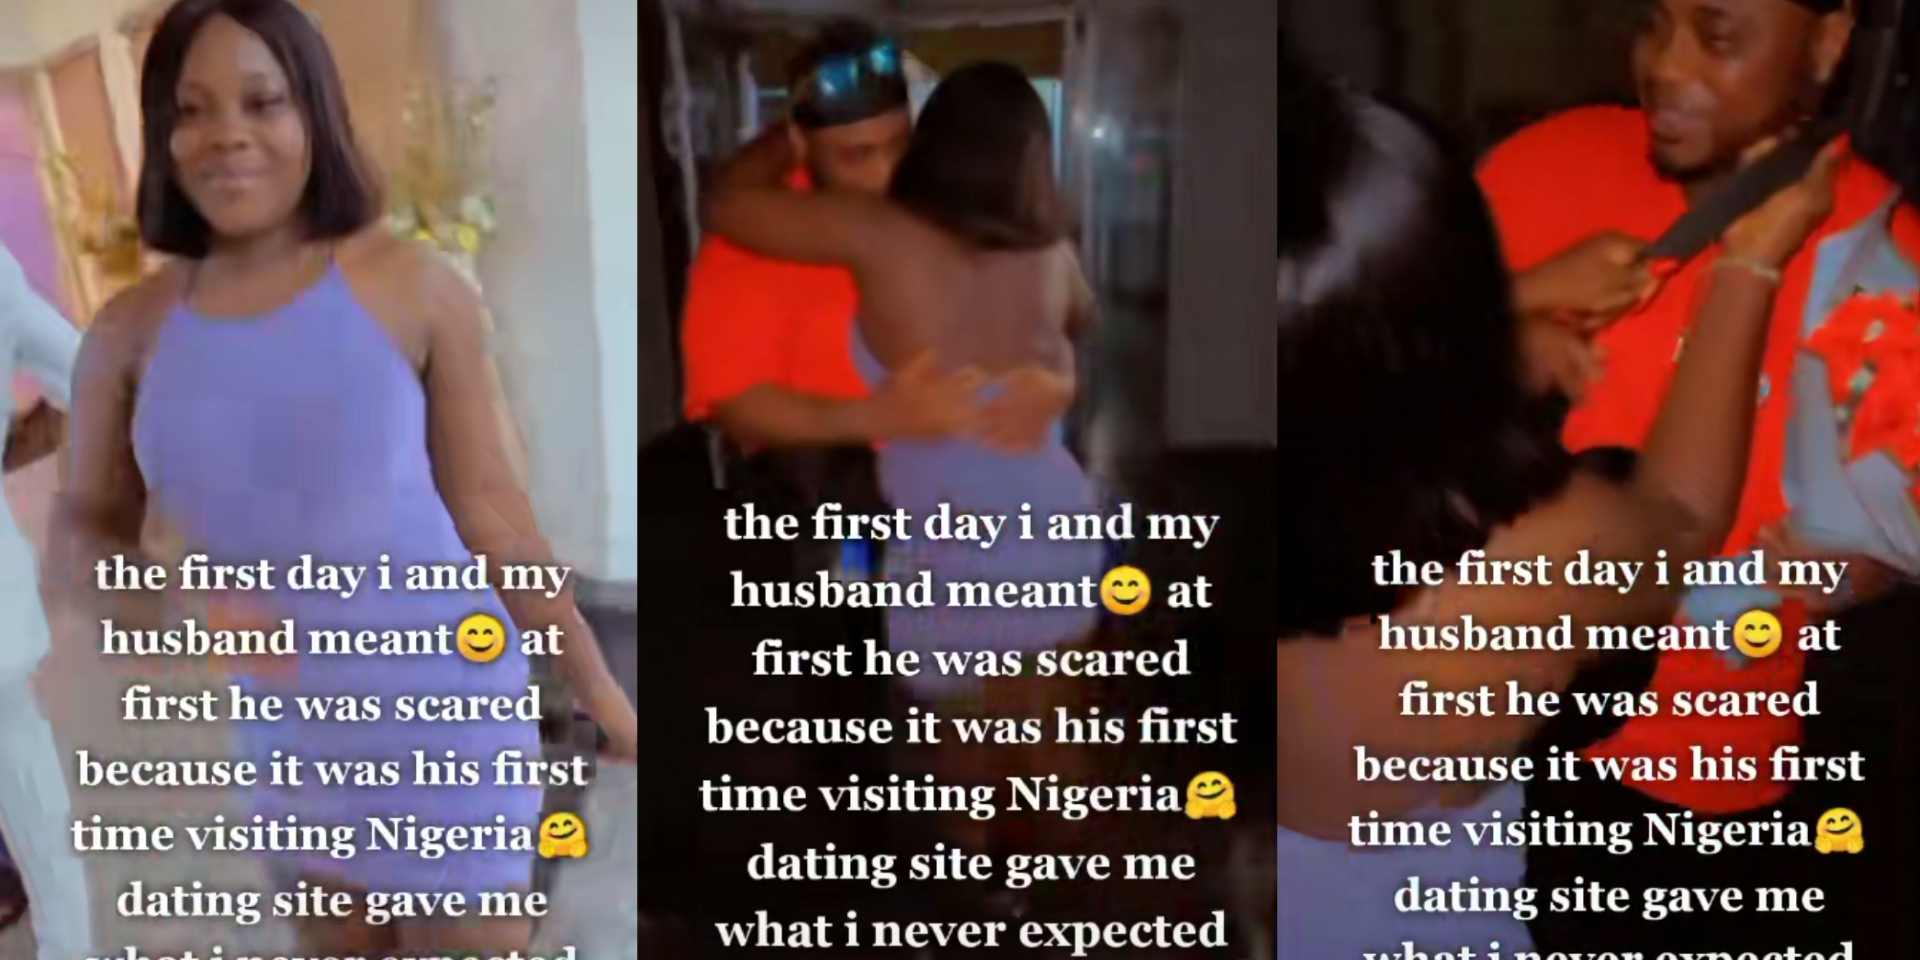 "Dating site gave me what I never expected" – Lady celebrates meeting her husband online